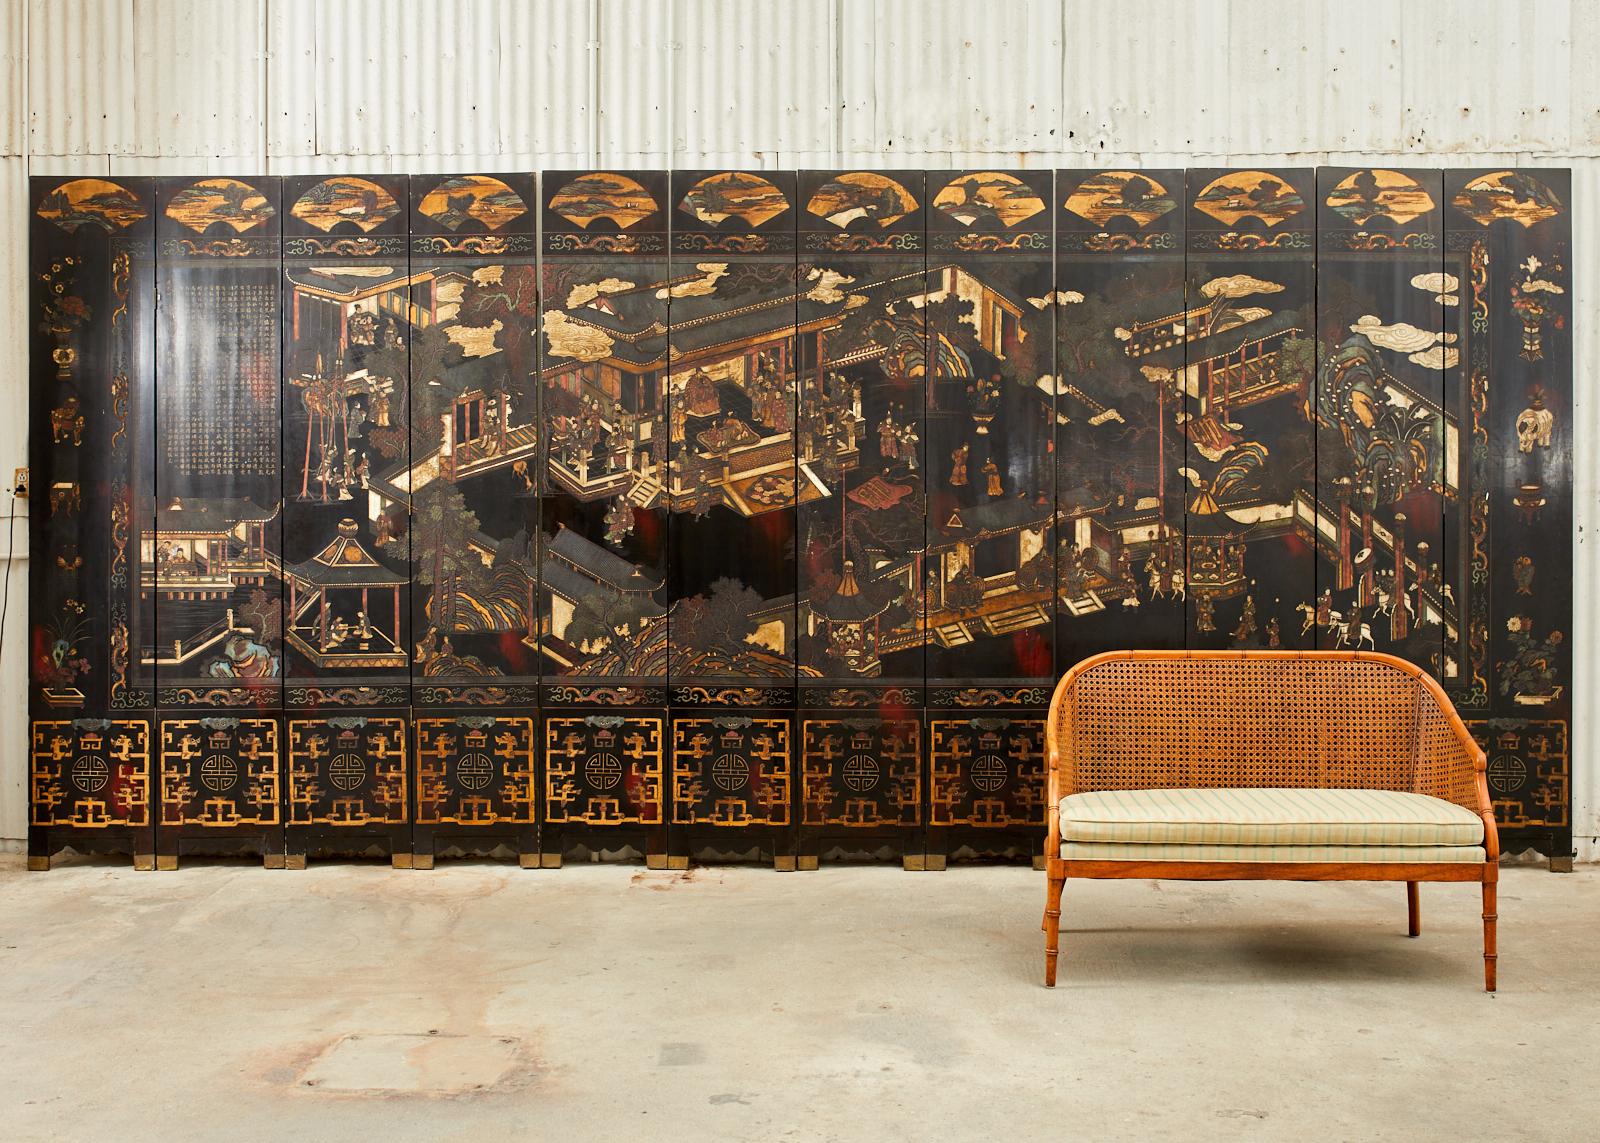 Early 20th century Chinese late Qing dynasty twelve panel lacquered coromandel screen. The grand screen features a royal pavilion courtyard with figures. Each panel measures 17.5 inches wide with thick lacquer. Intricately carved and incised with